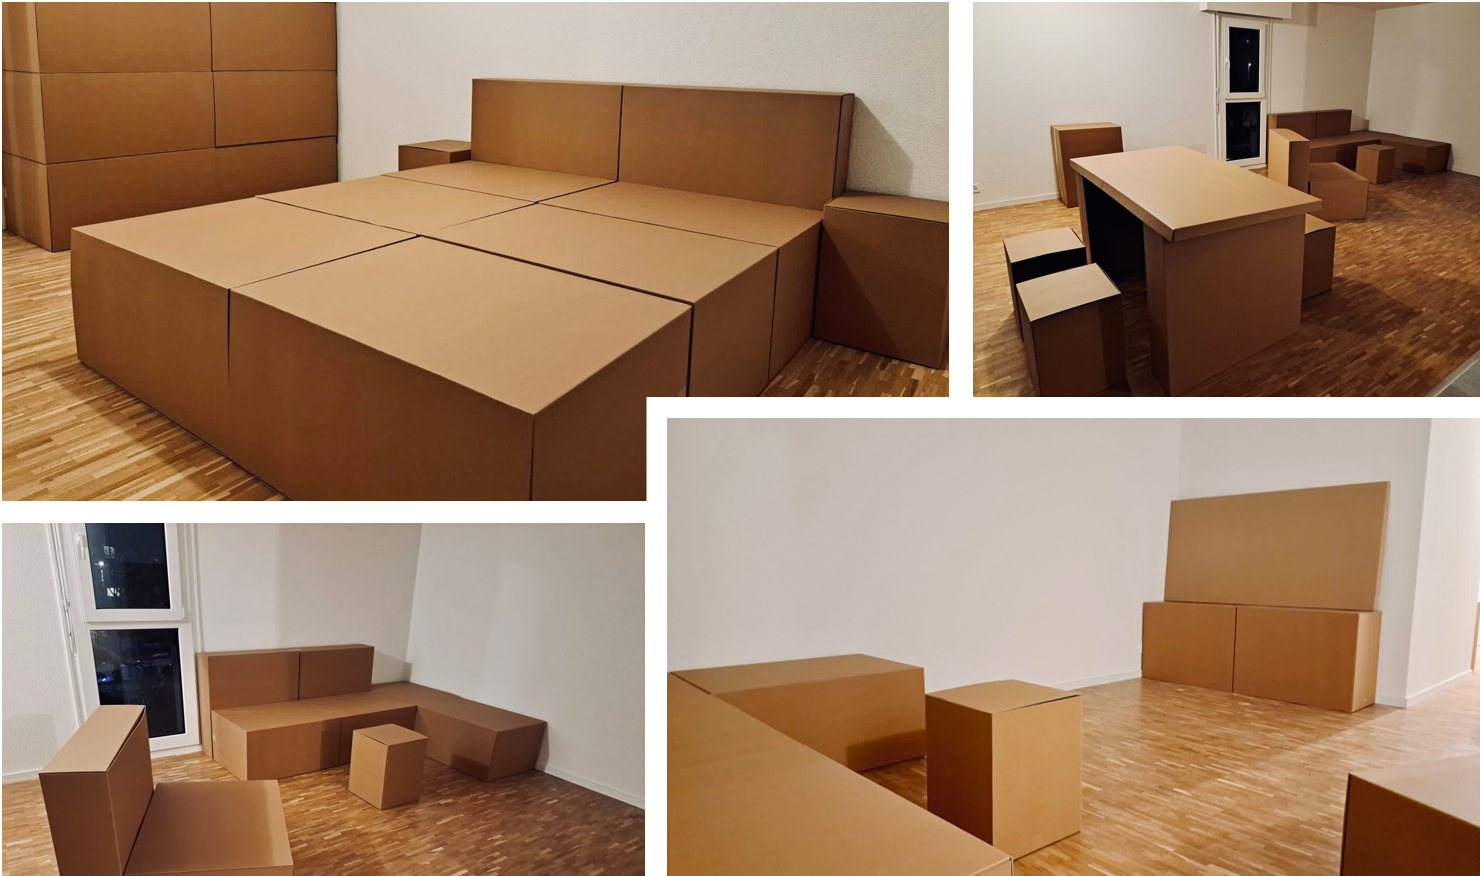 You are currently viewing “Home staging” with cardboard boxes